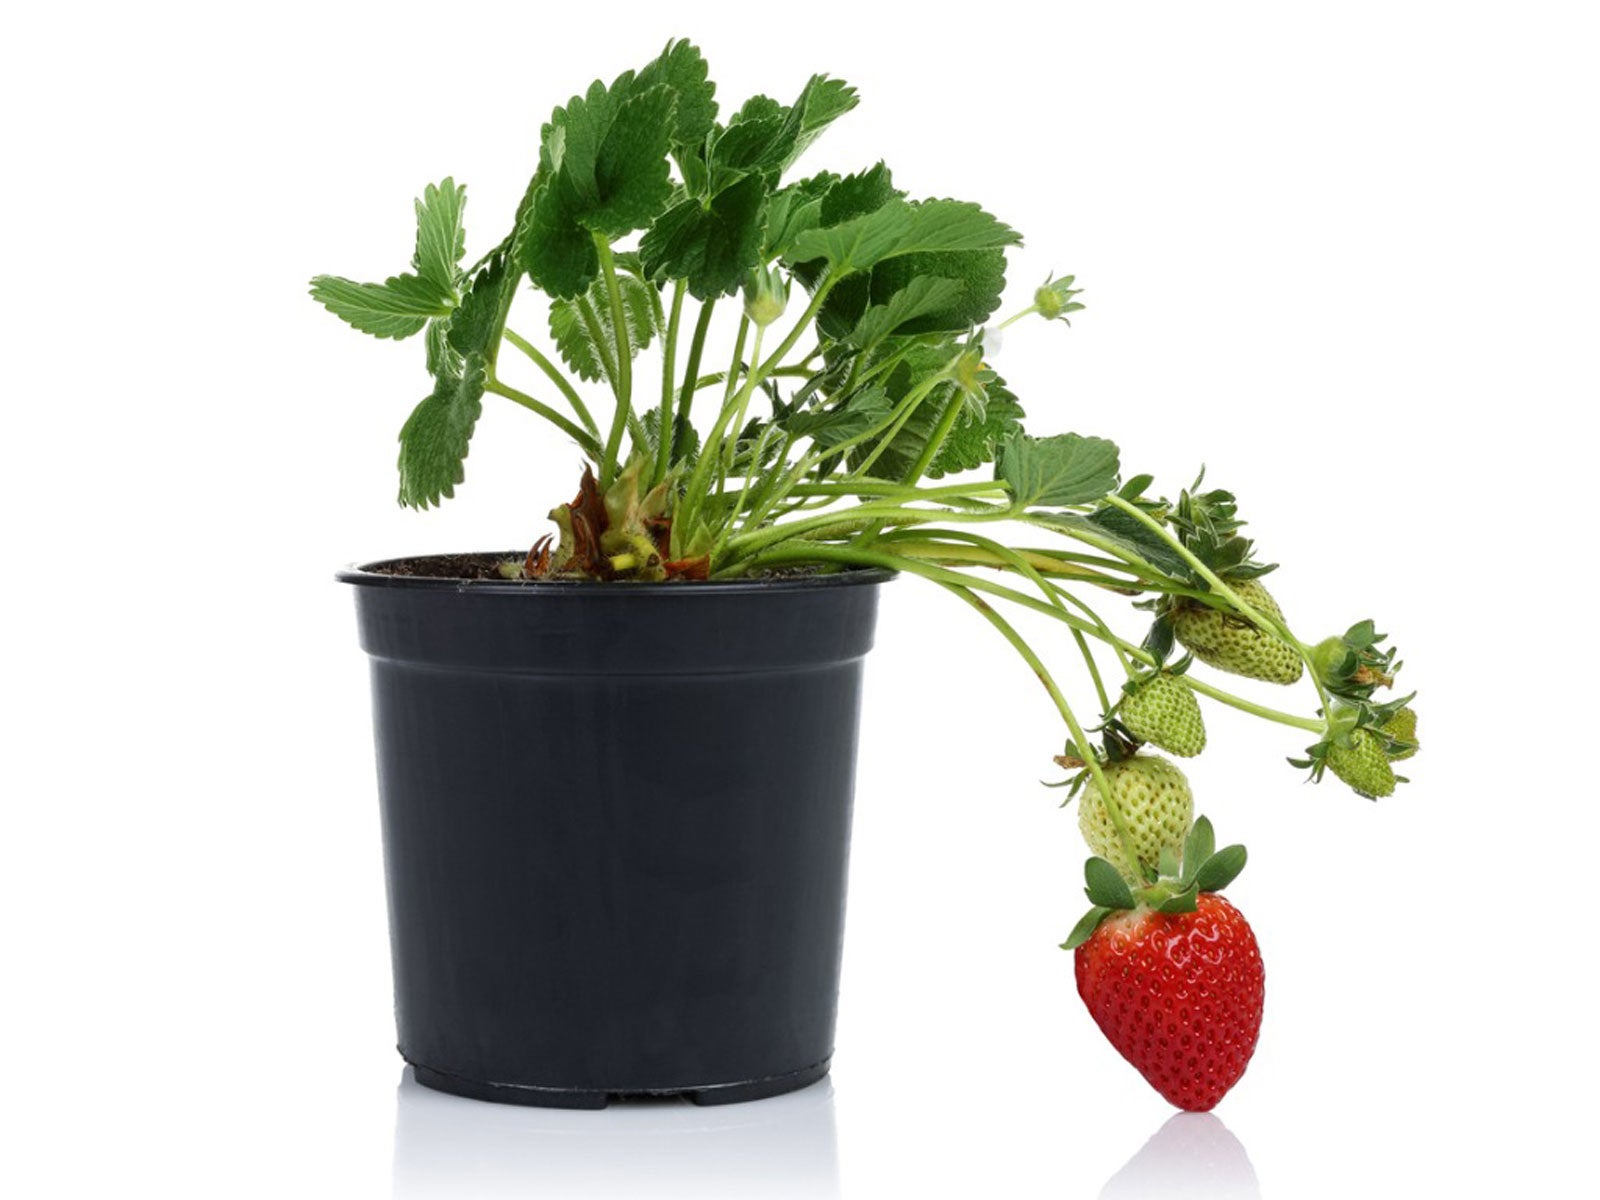 Strawberry Houseplants   Tips For Growing Strawberries Indoors